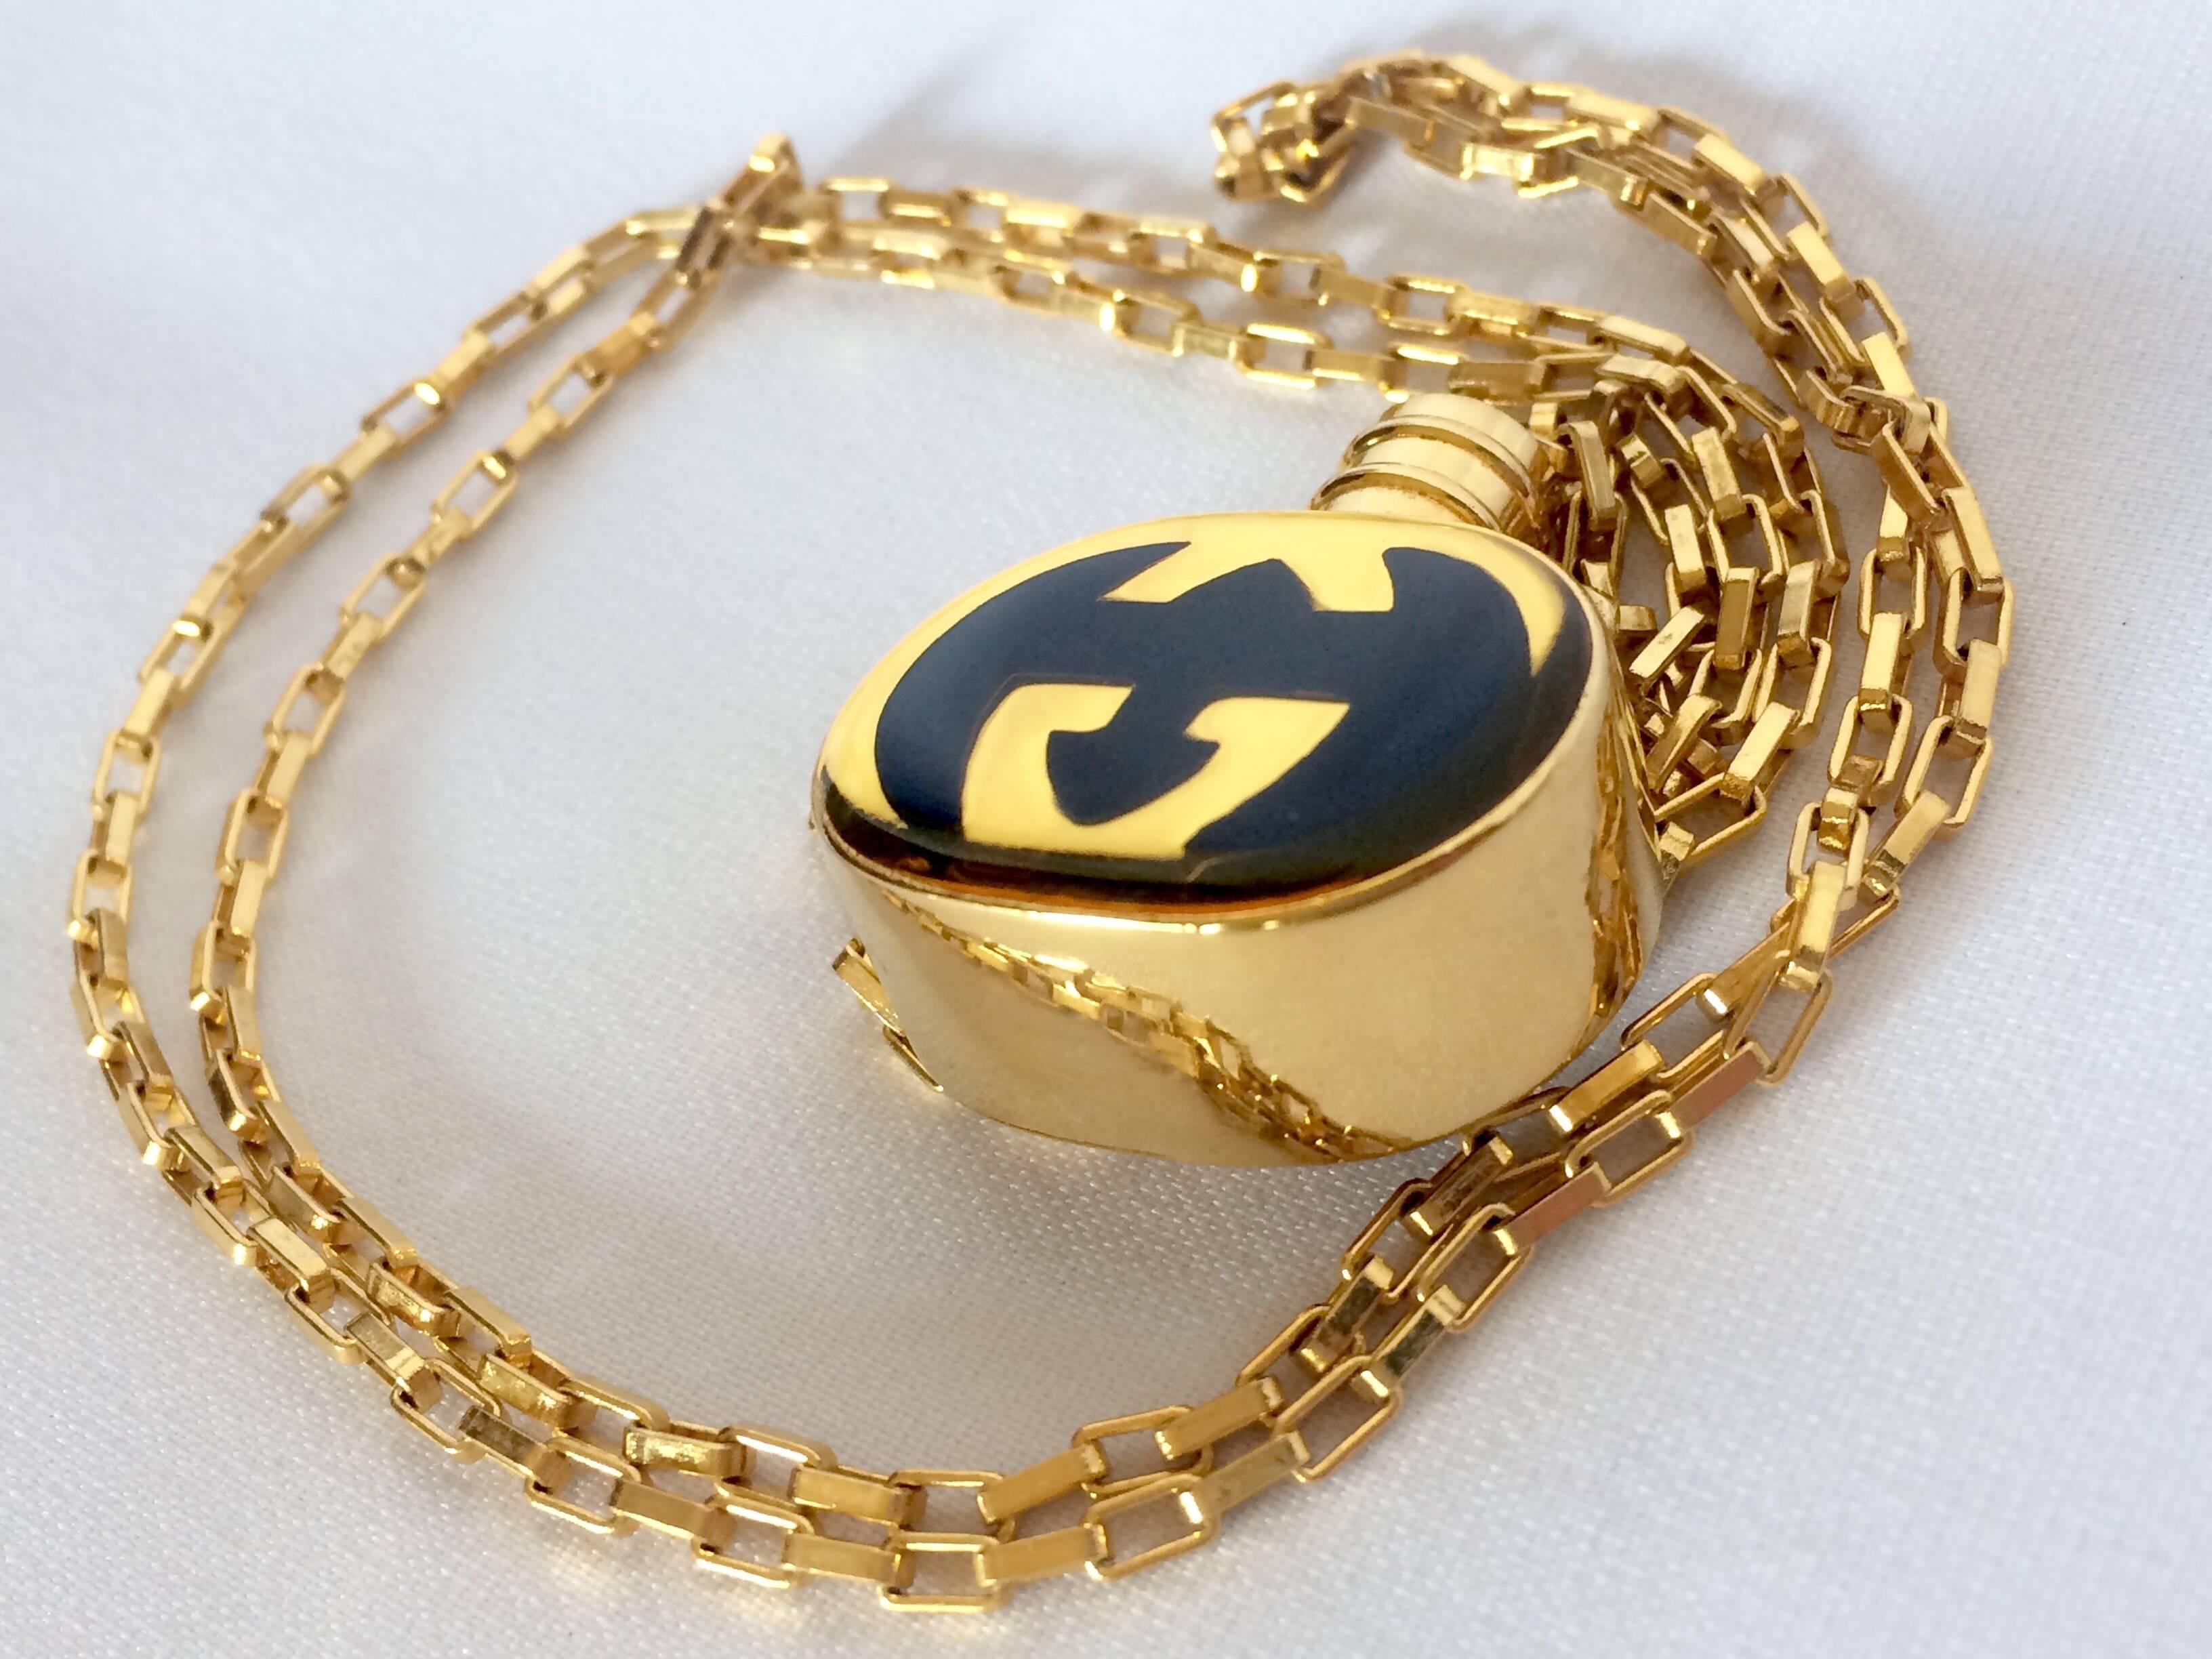 Women's Vintage Gucci gold and navy round shape perfume bottle necklace with logo mark.